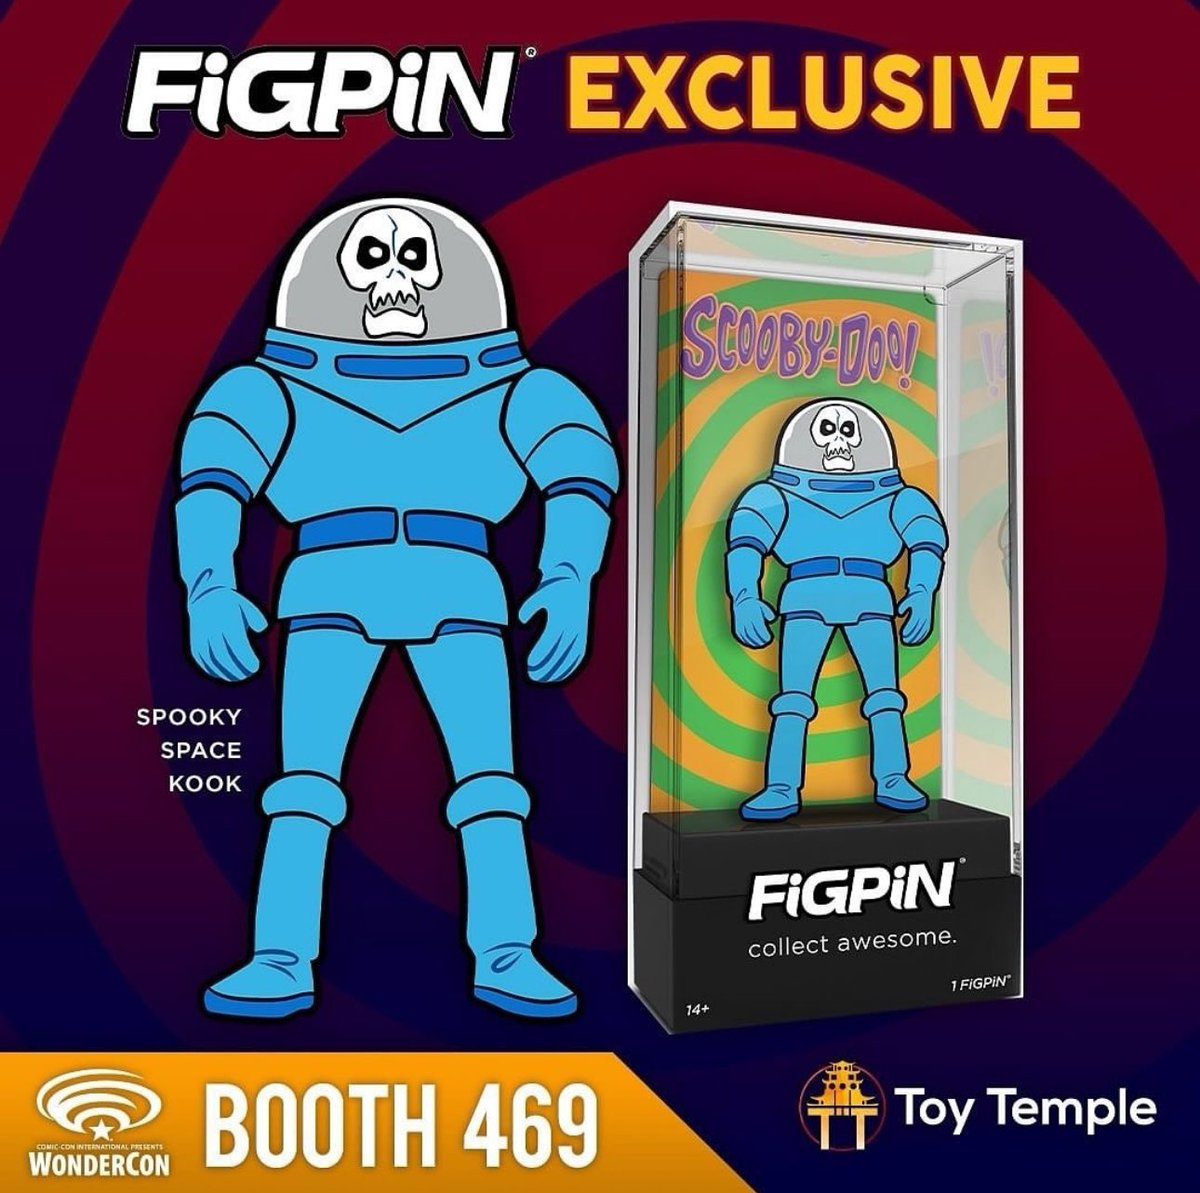 Spooky Space Kook from Scooby-Doo is a @plasticempire exclusive that will be available first at the @toytempleofficial booth at Wondercon.
@figpinofficial #FiGPiNs FiGPiN #CollectAwesome